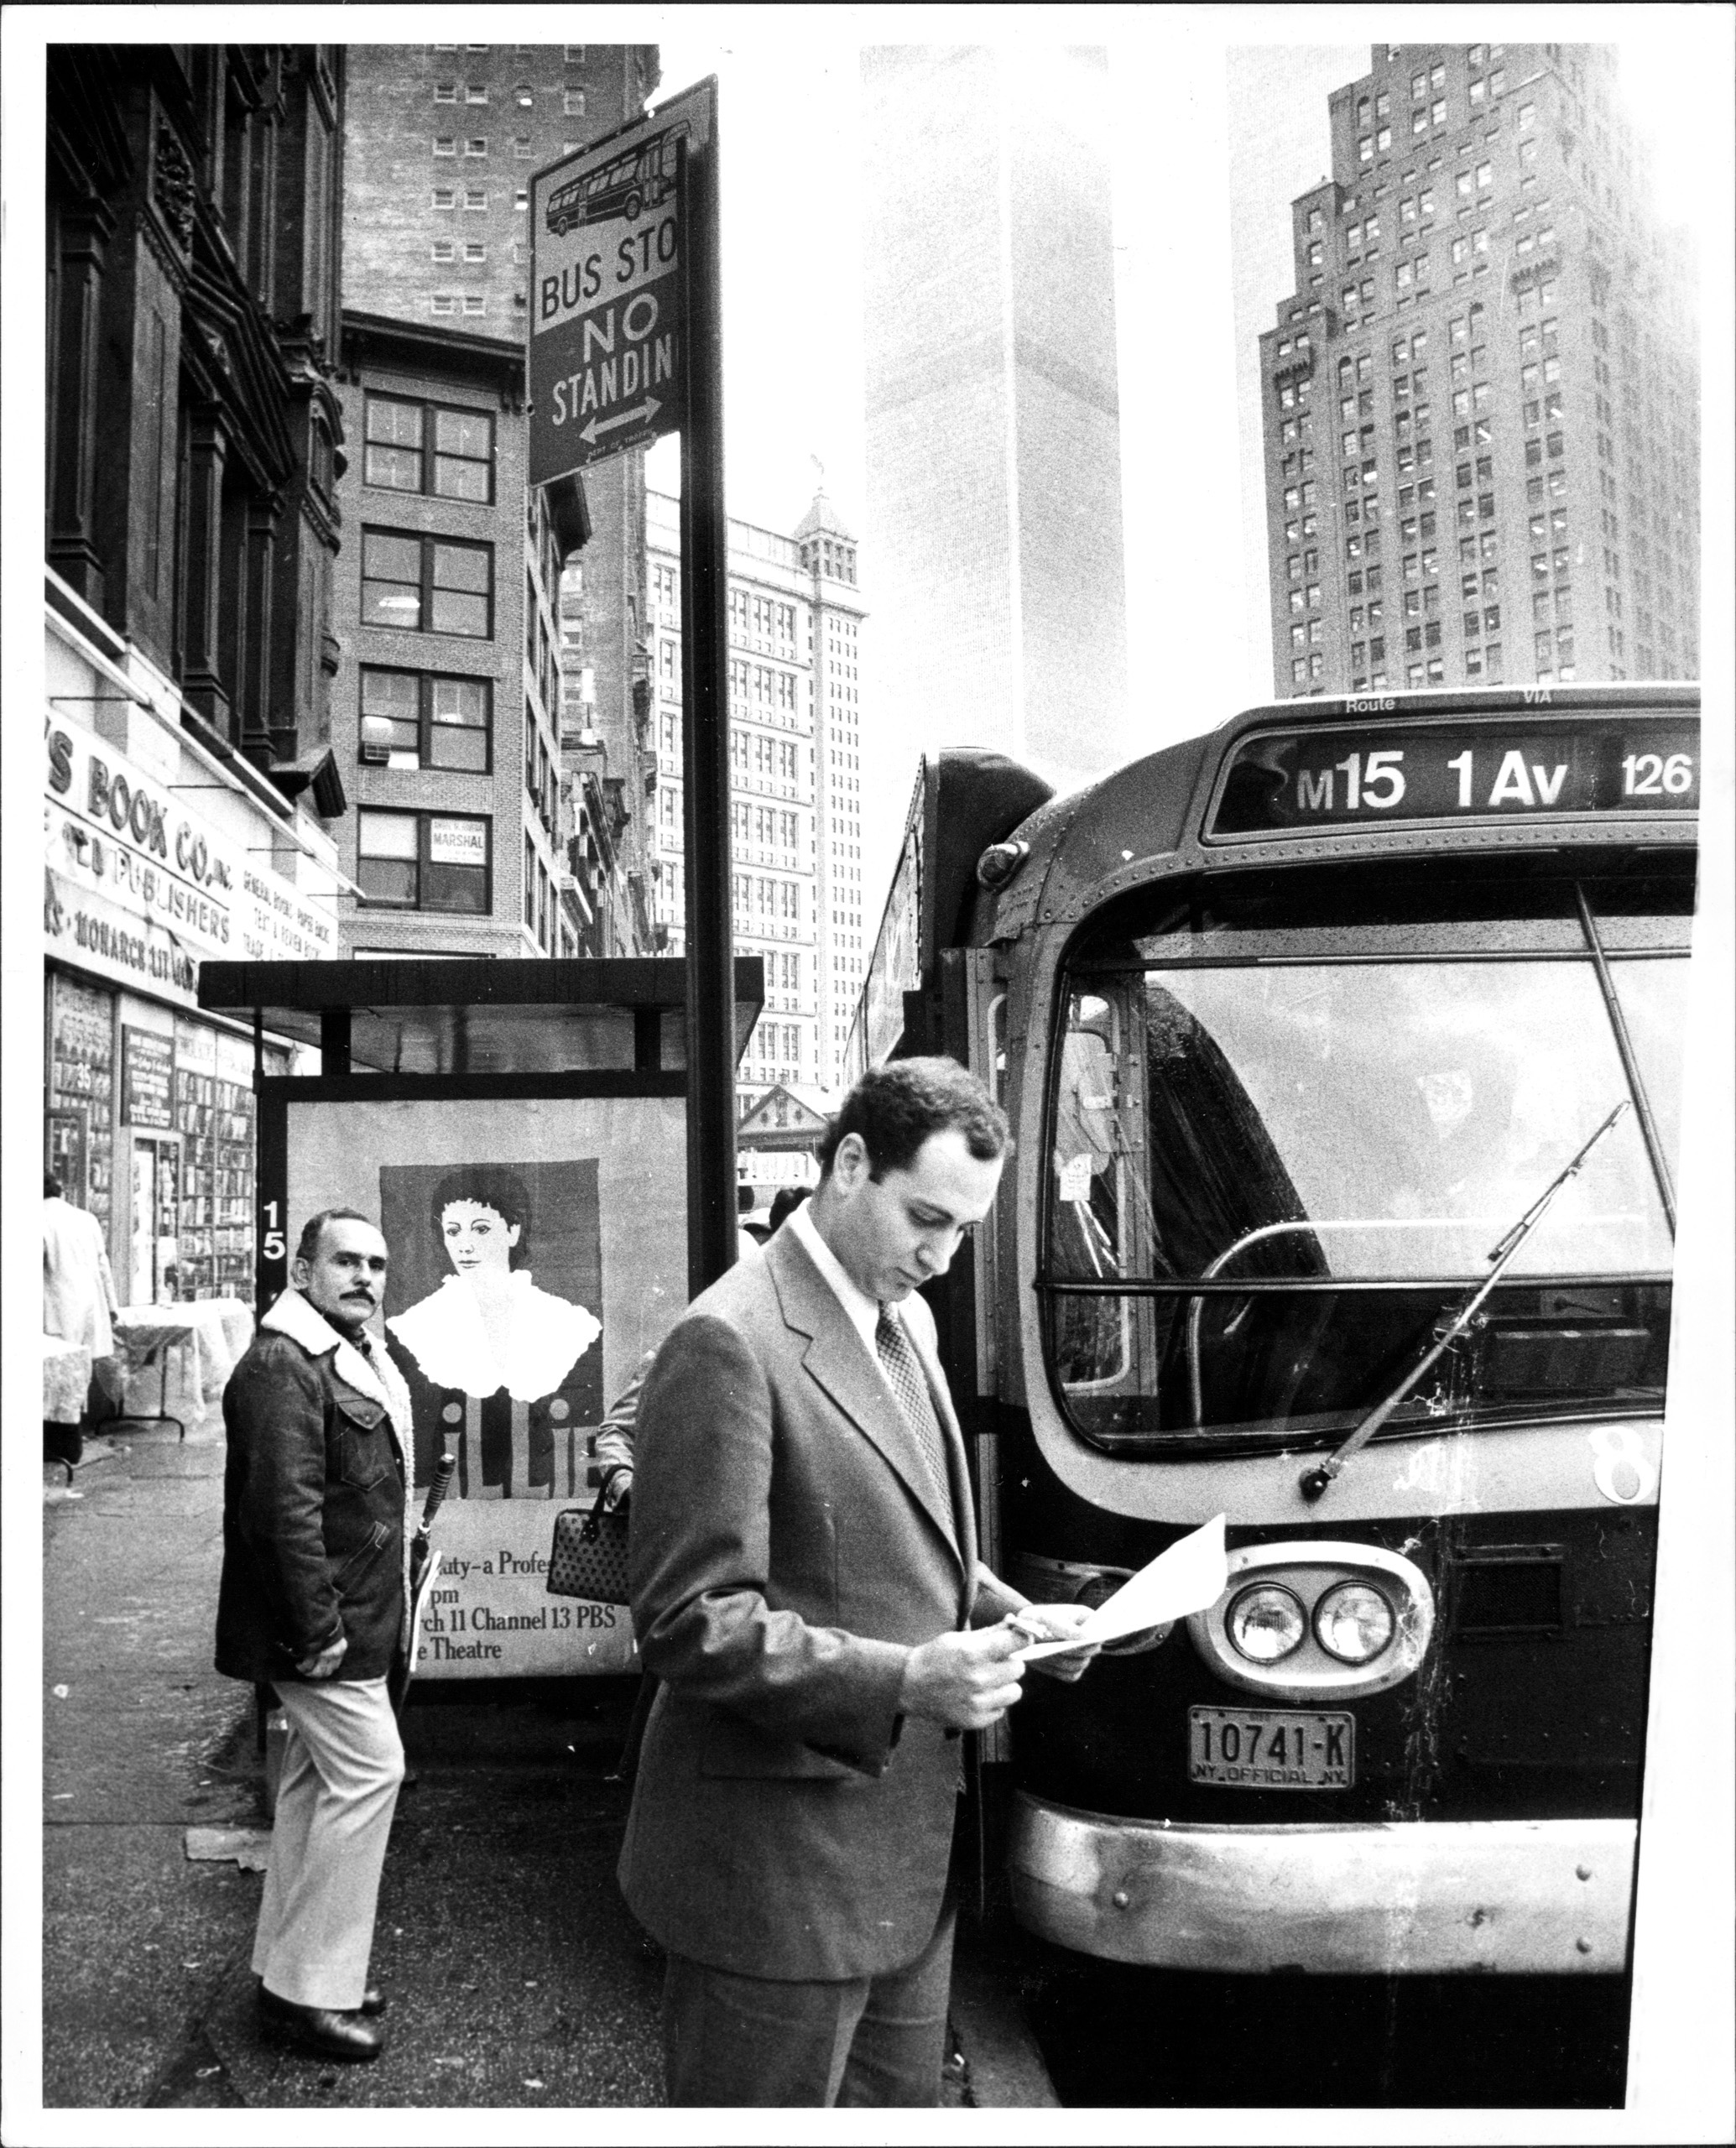 Assemblyman Schumer as the chairman of the Assembly's Committee on Legislative Oversight and Investigation as he monitors the schedule of the buses, April 16, 1979.